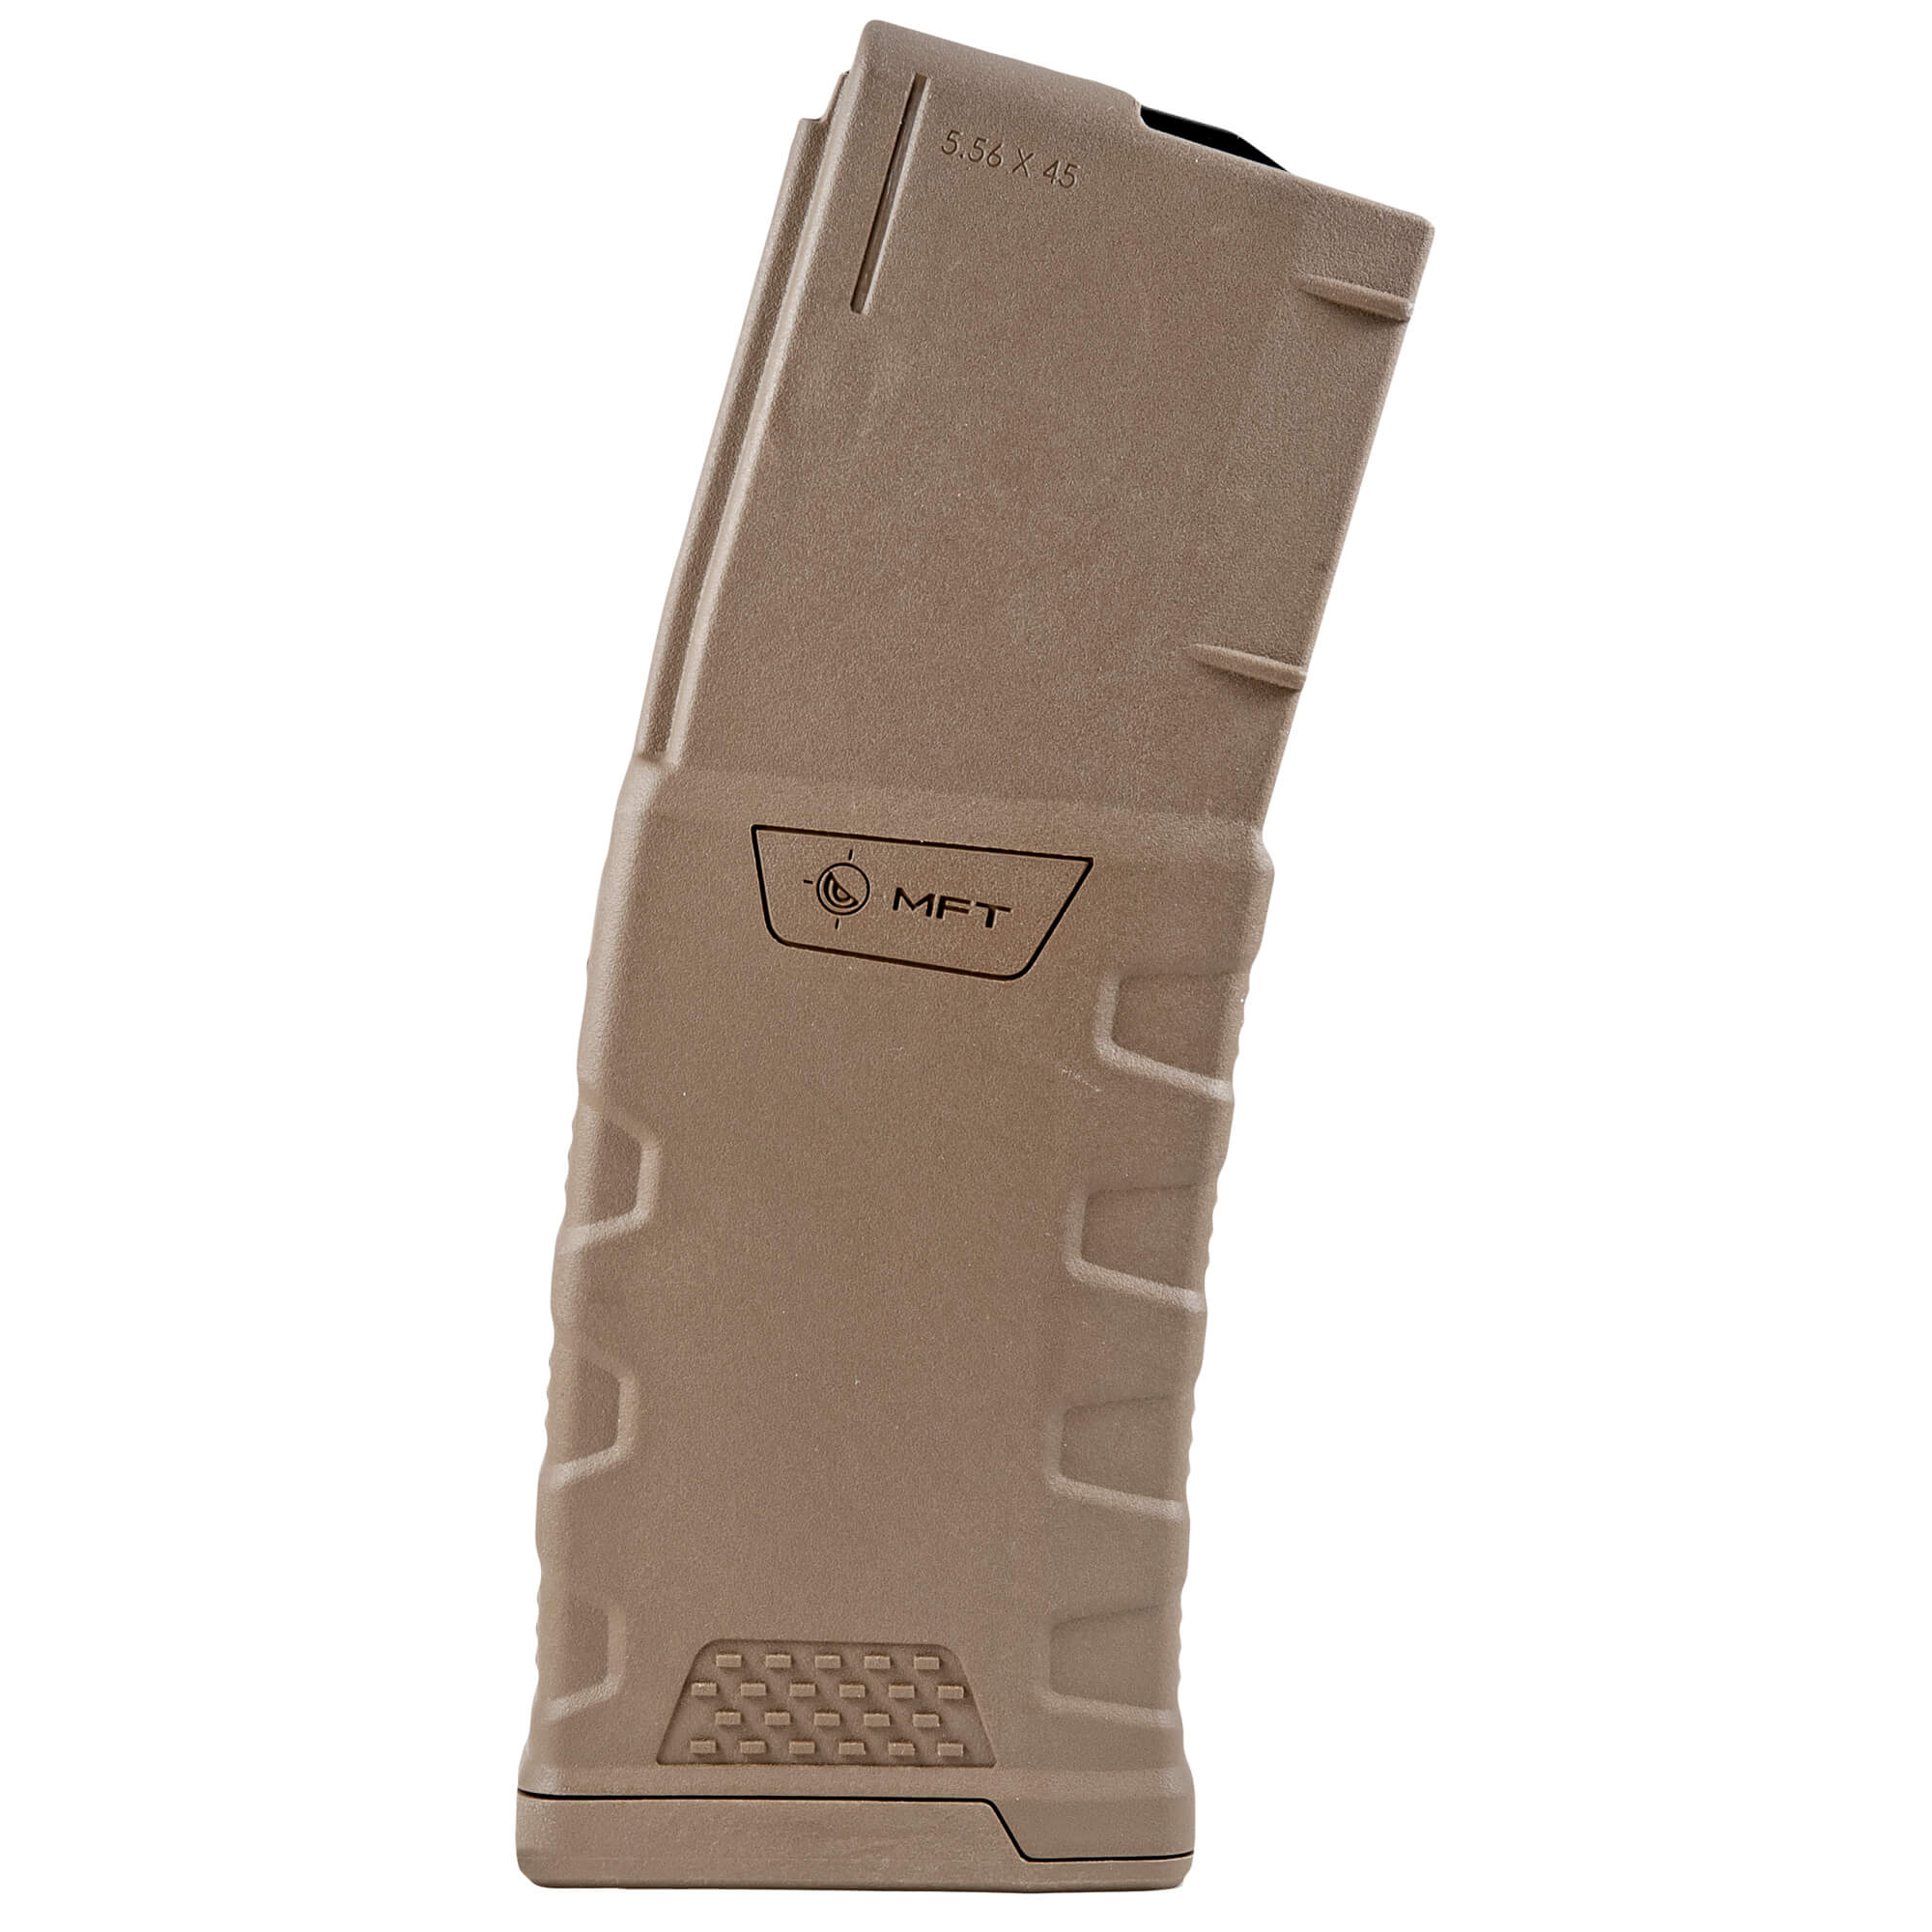 Mission First Tactical Extreme Duty Polymer Magazine 30 Round Flat Dark Earth